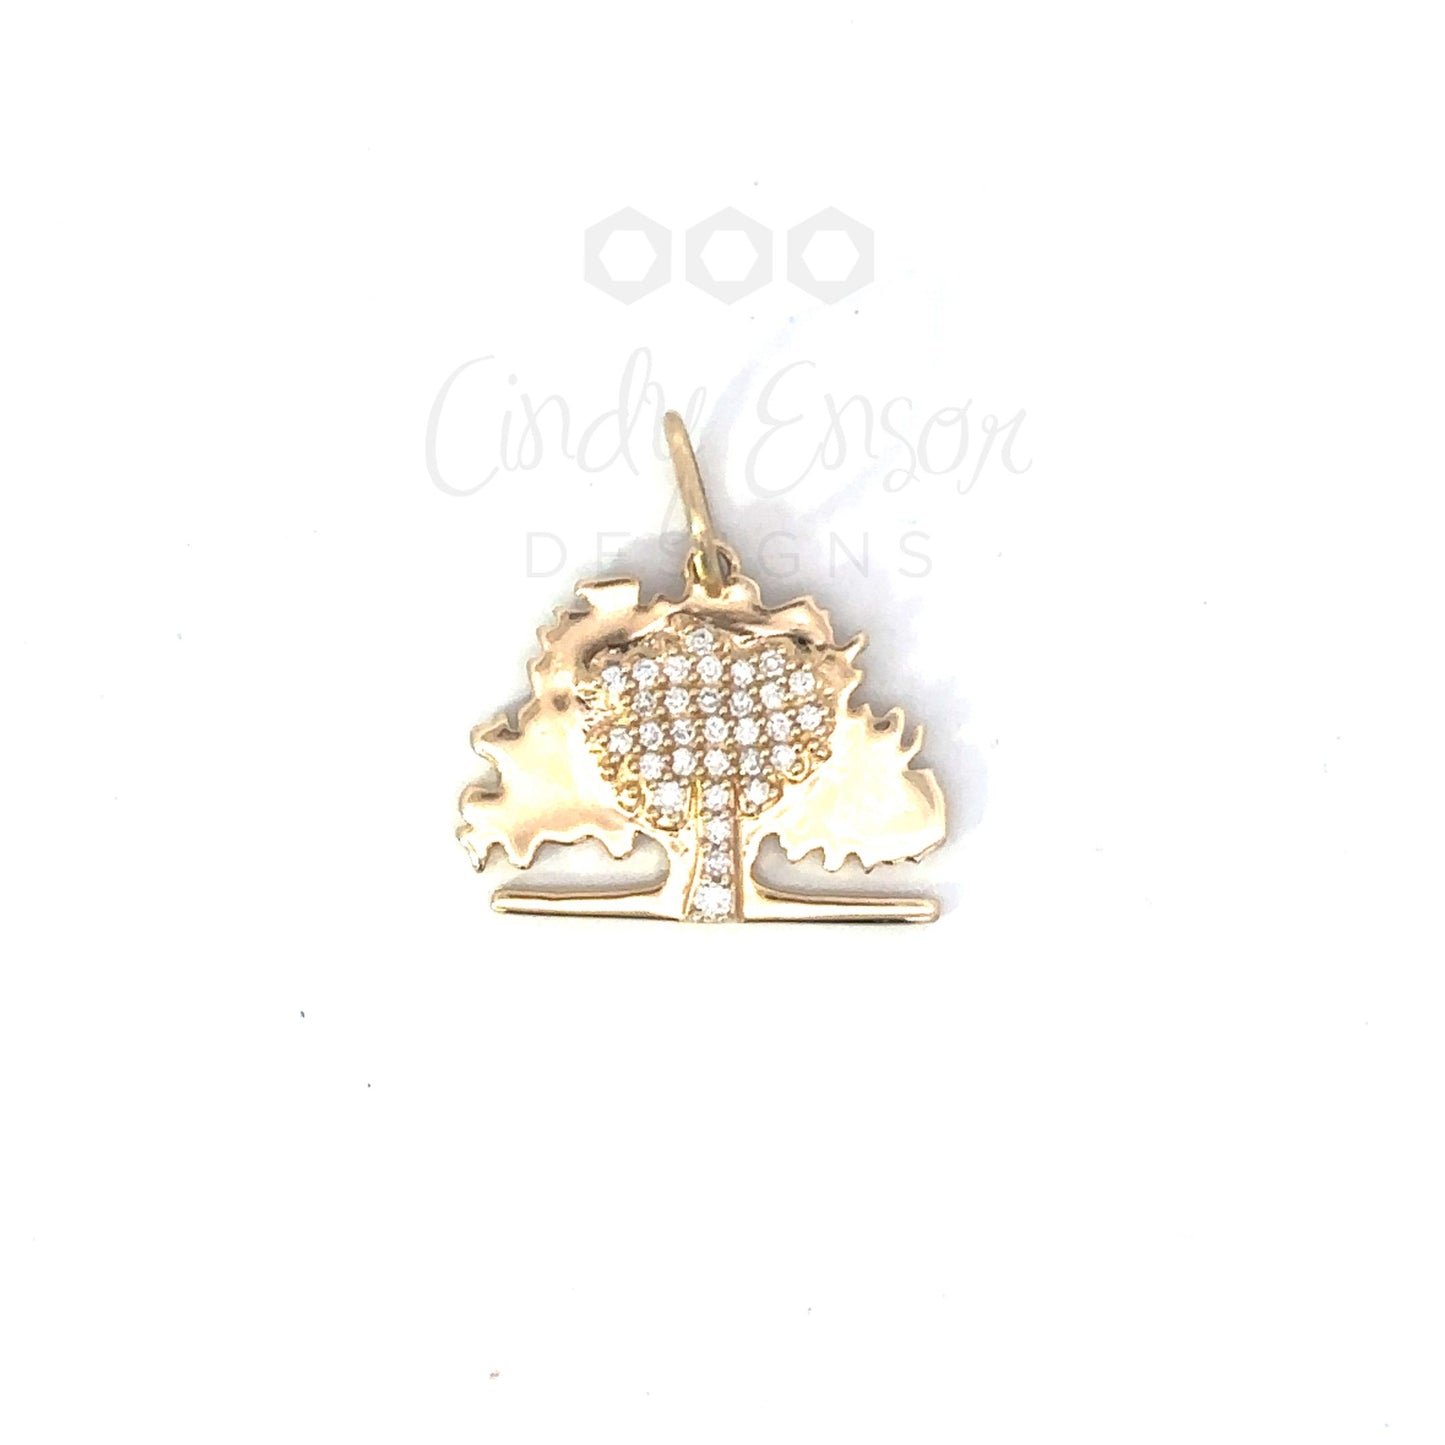 Tree of Life Pendant with Pave Diamond Accents